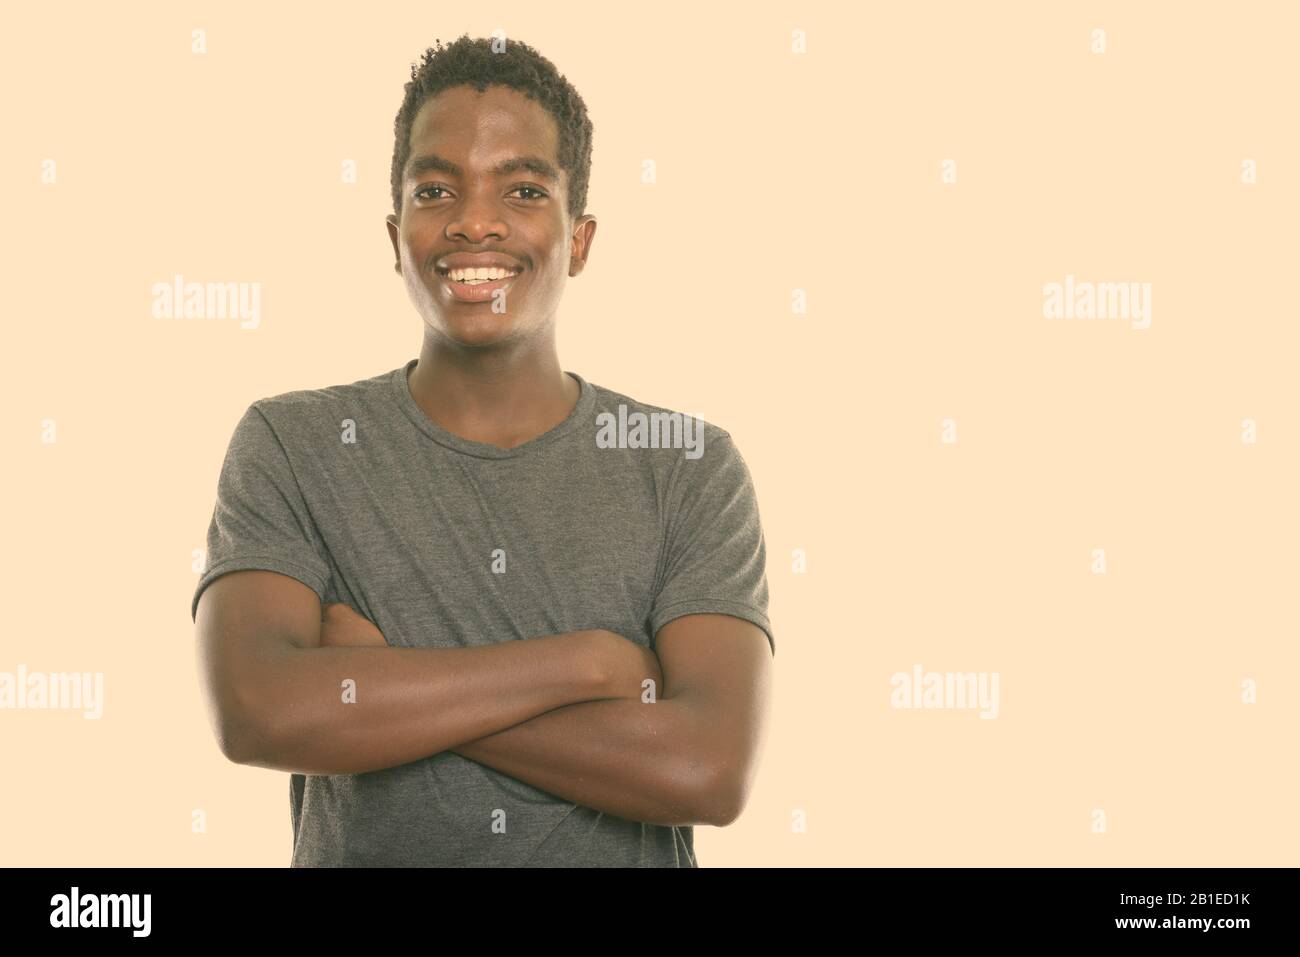 Studio shot of young happy black African teenage boy smiling with arms crossed Stock Photo